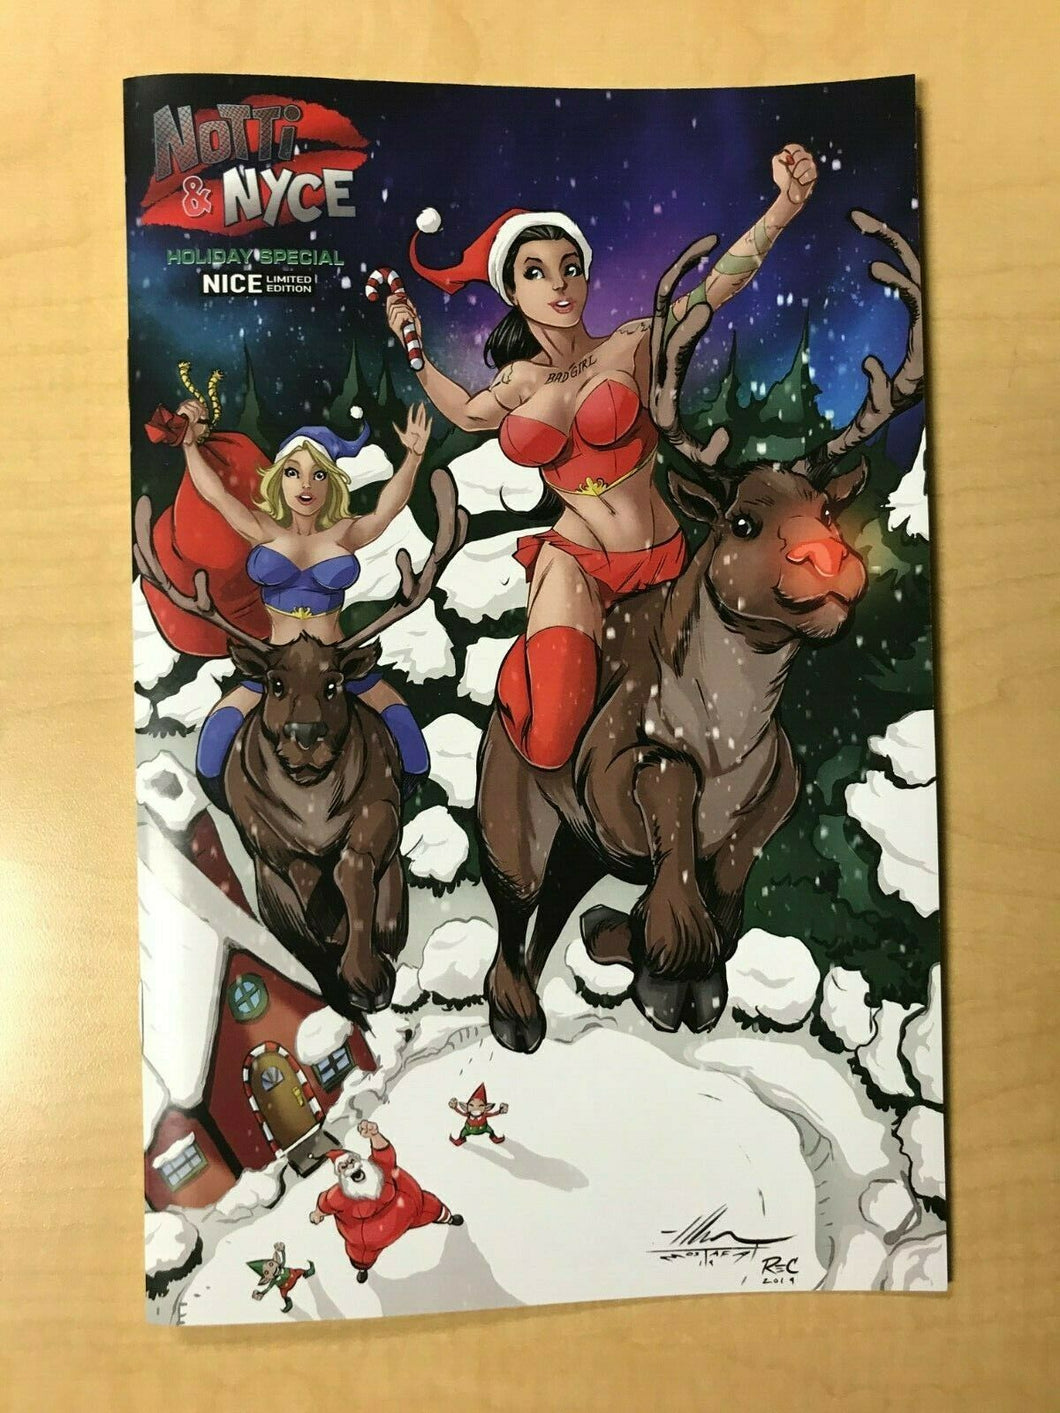 Notti & Nyce 2019 Christmas Holiday Special NICE Variant Cover by Ale Garza